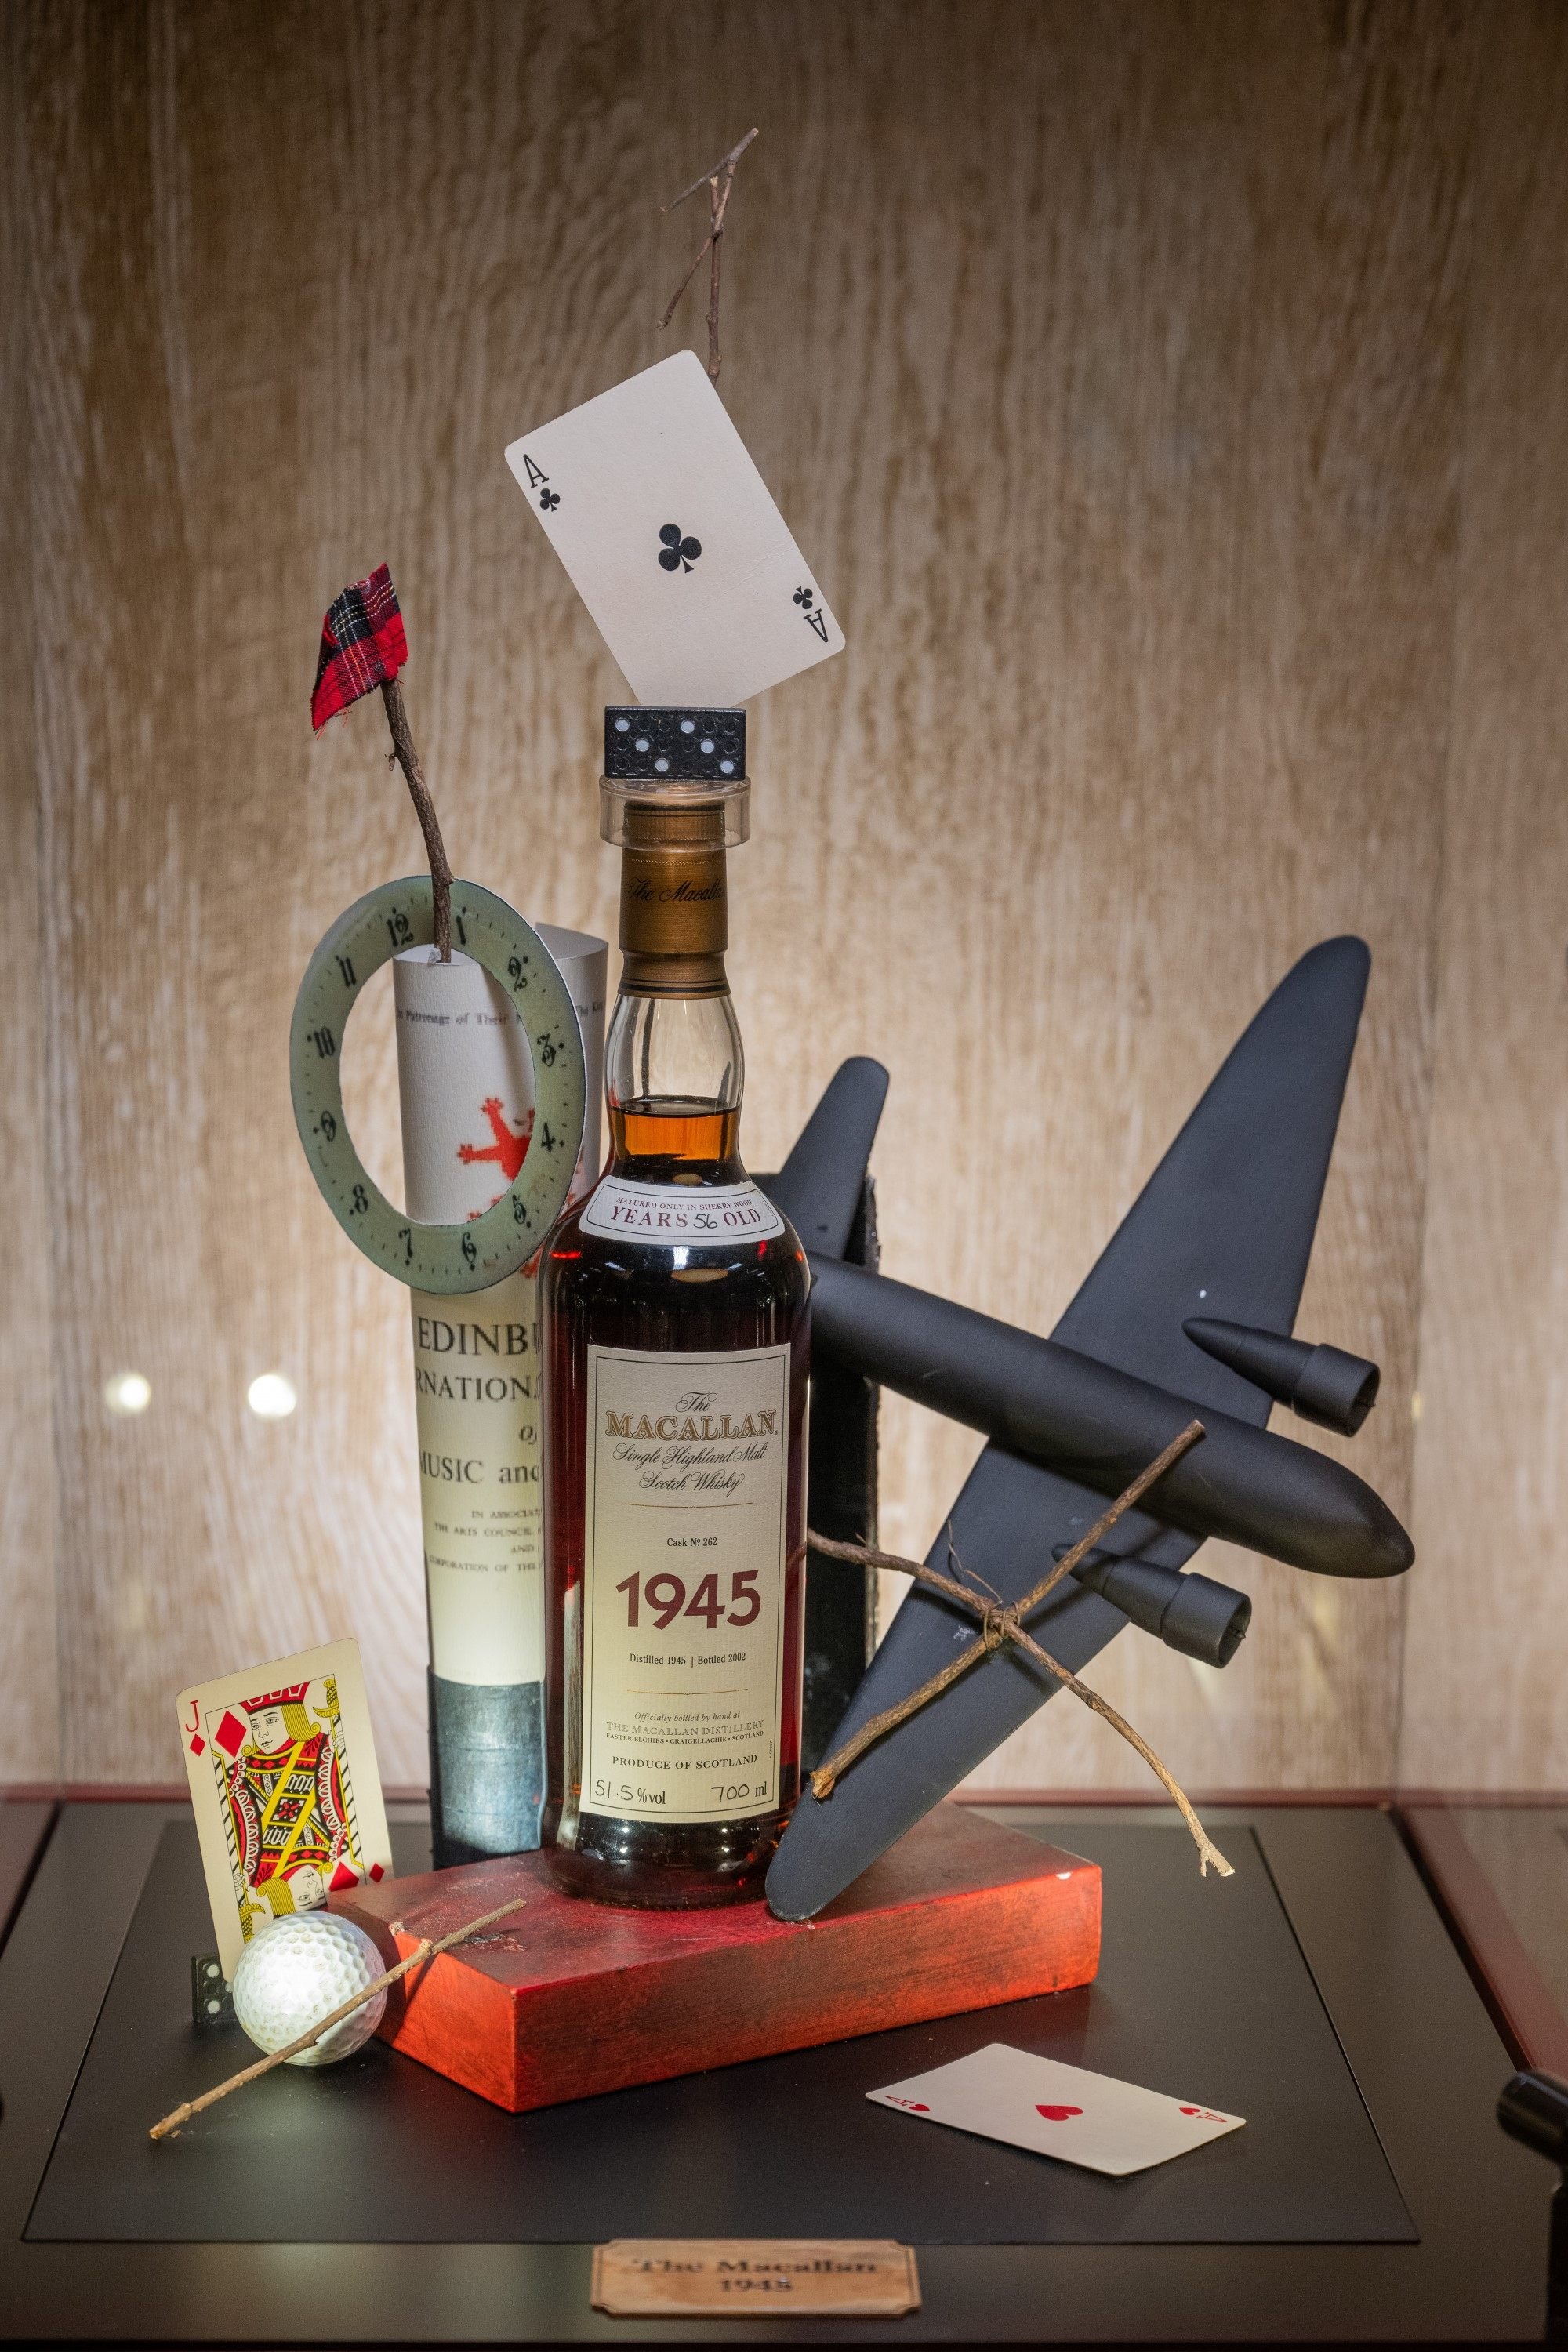 A bottle of 1945 Macallan single malt Scotch whisky on display as part of the “Time Travel: the Macallan 200 Years Young” exhibition at The Macallan Whisky Bar & Lounge at the Galaxy Macau resort in Macau, which celebrates the Macallan distillery’s 200th anniversary. Photo: Galaxy Macau